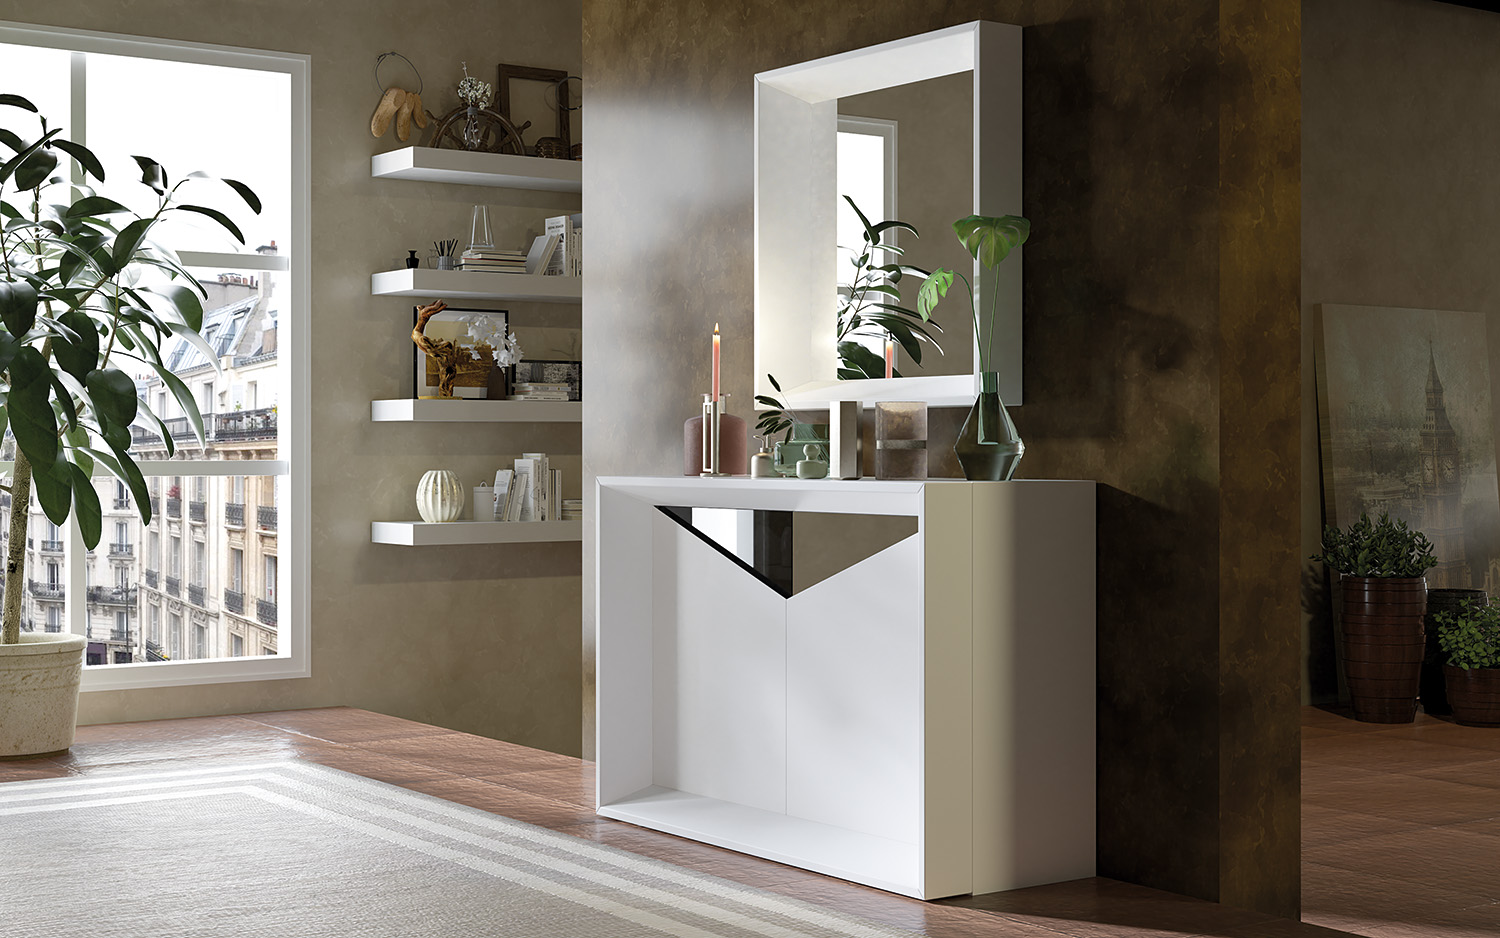 Brands Franco Kora Dining and Wall Units, Spain ZII.03 SHOE CABINET